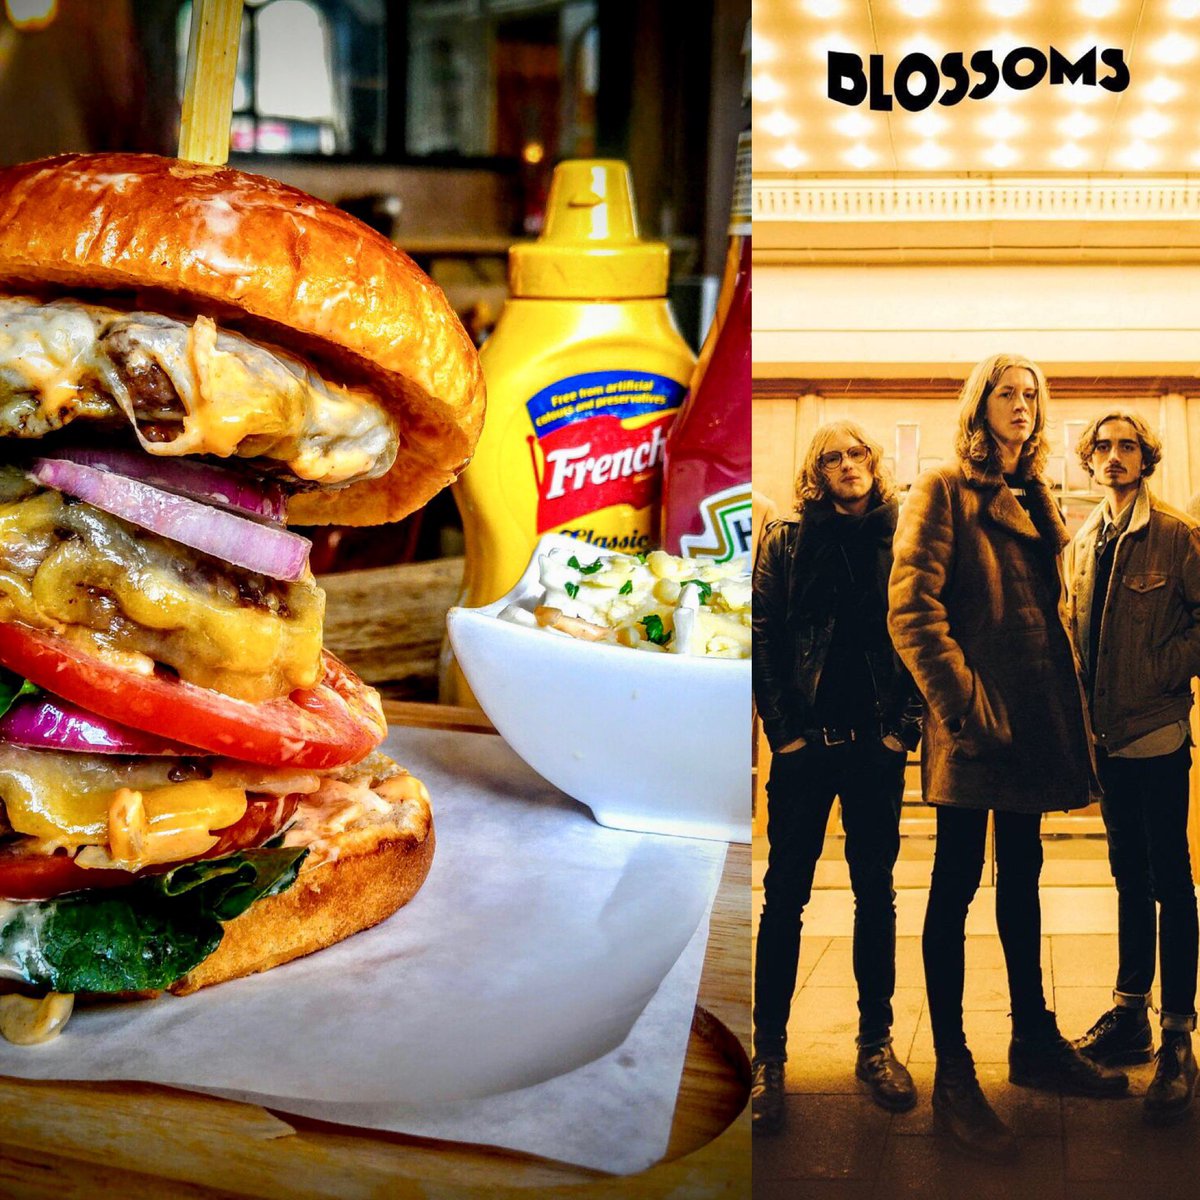 🚨🚨 FREE BURGERS!🚨🚨 To celebrate the launch of our new Naked Burger Co Menu we are giving the first 20 people to arrive from 5pm on Thursday 22nd August a free custom burger with 2 toppings!! Then we’ll be hosting the after party for the Blossoms gig with dj til late 🎶 🕺💃